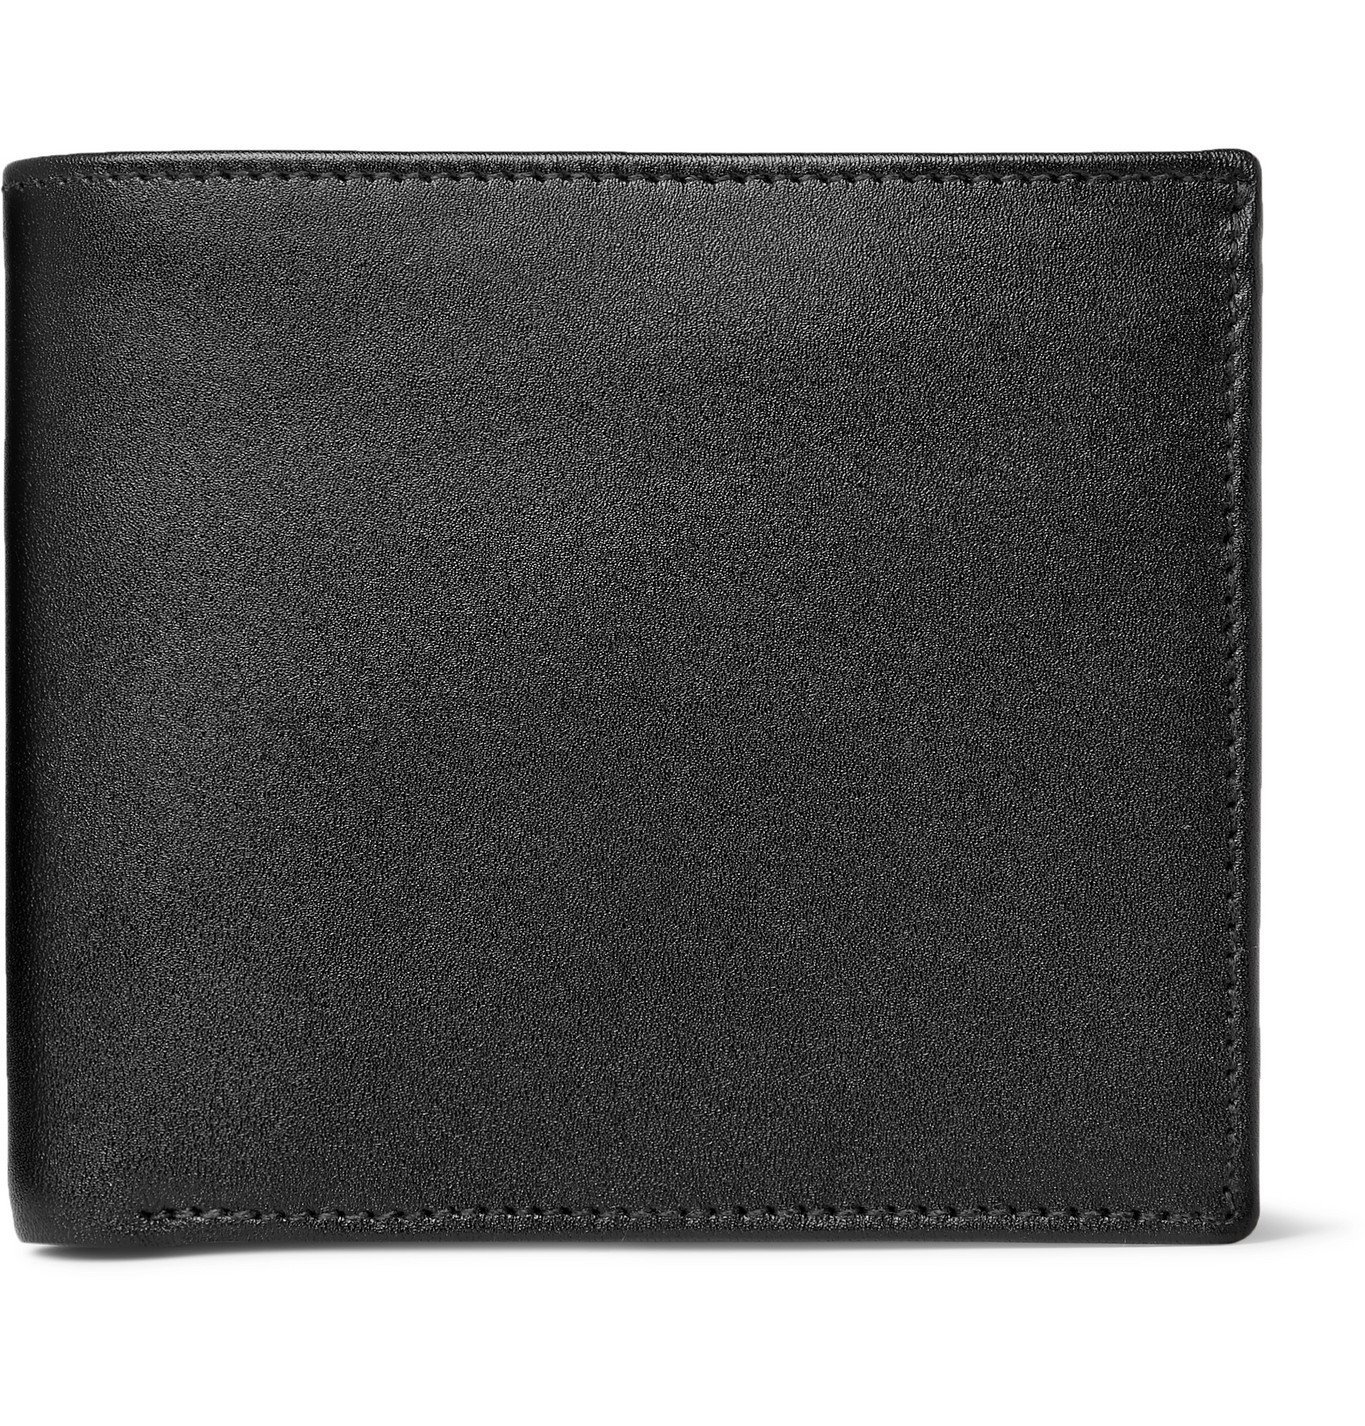 George Cleverley - Leather Billfold Wallet - Black George Cleverley